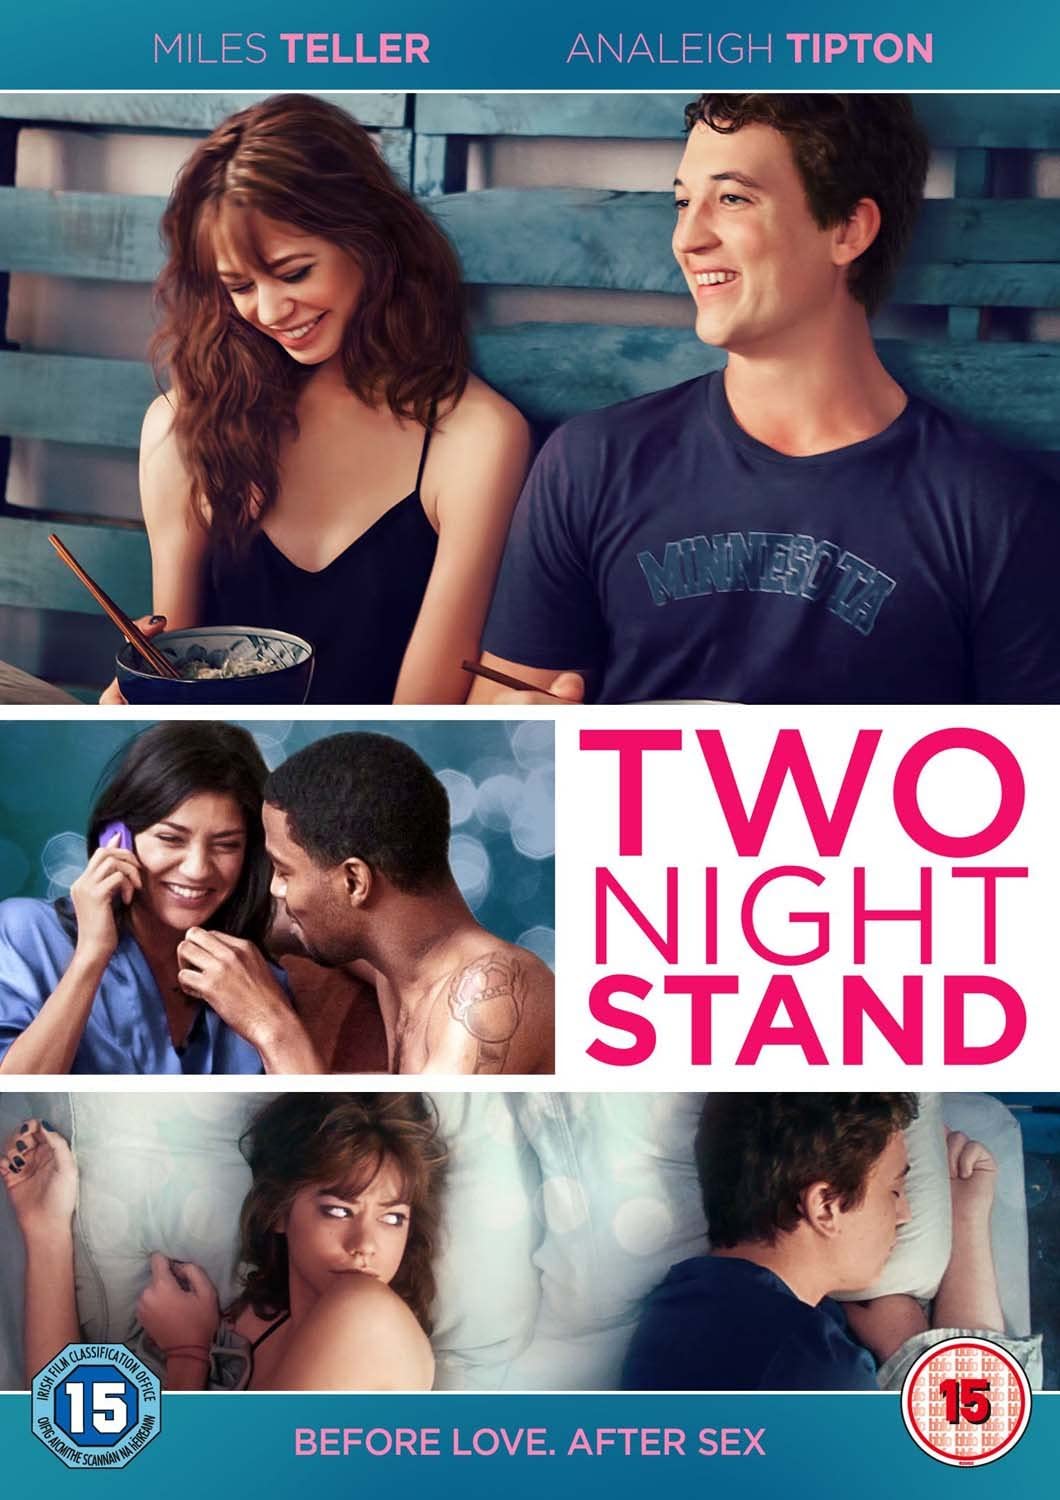 Two Night Stand - Romance/Comedy [DVD]